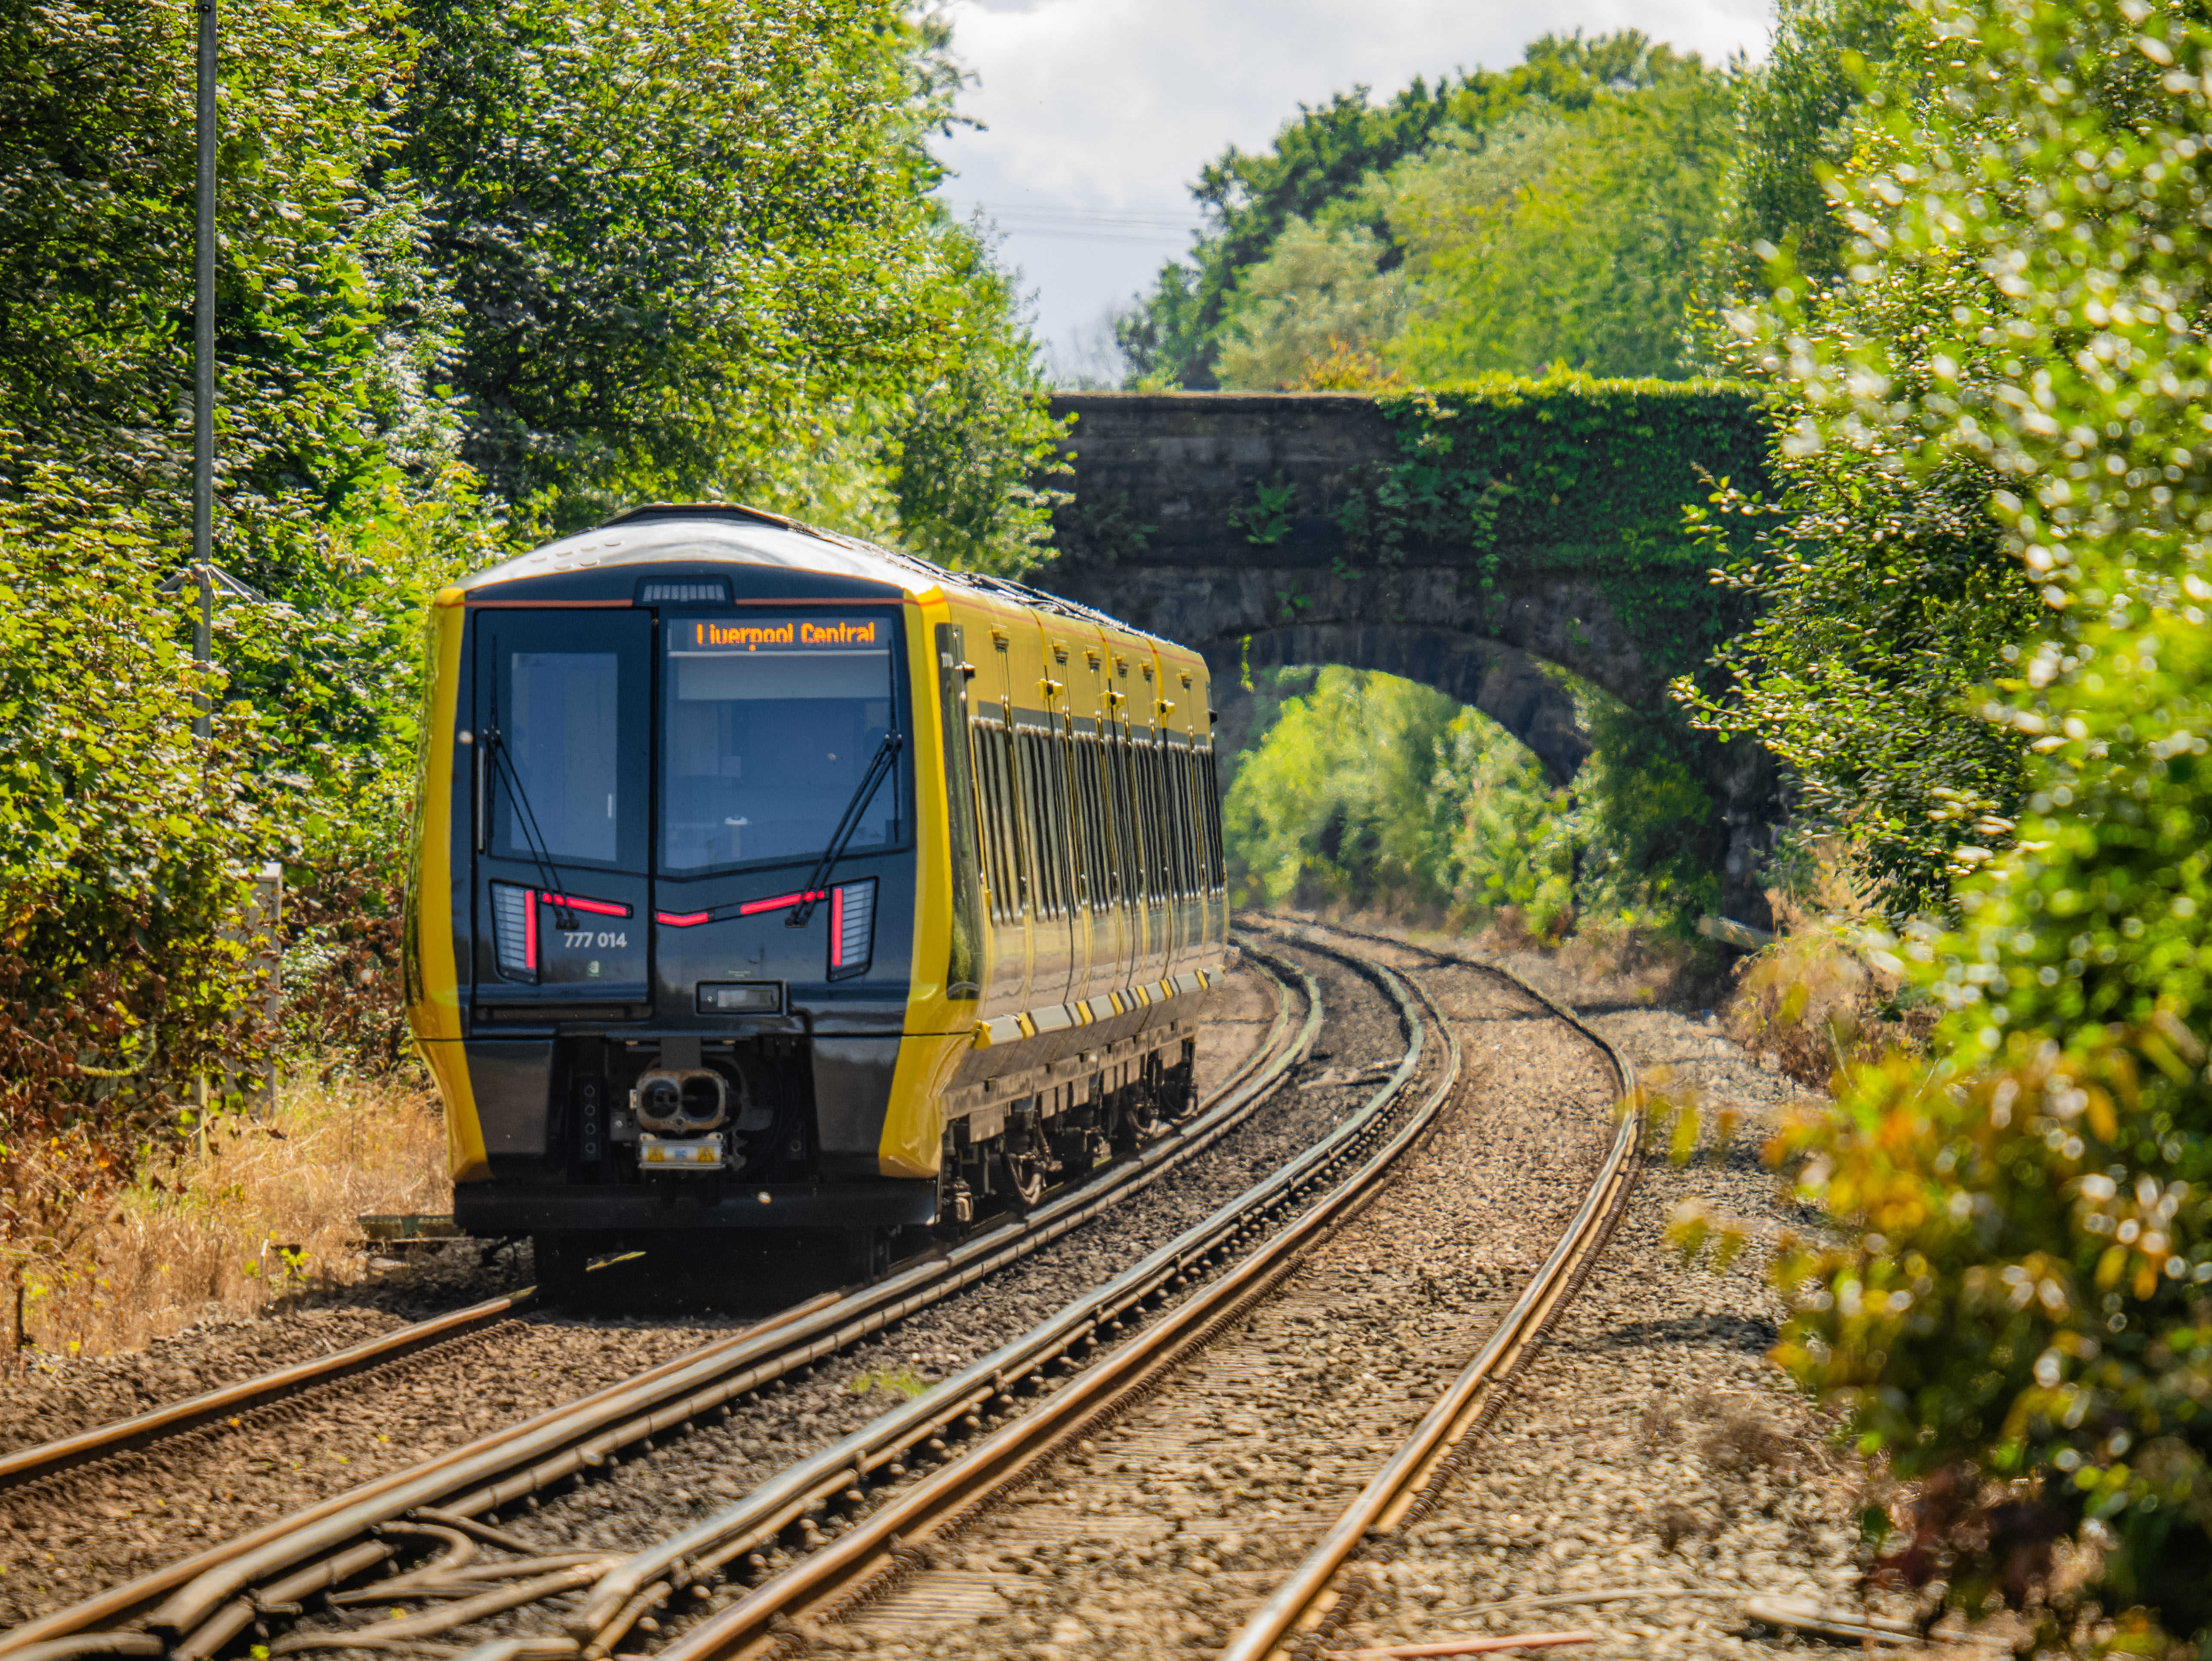 An oncoming 777 train at Aughton Park station at daytime.